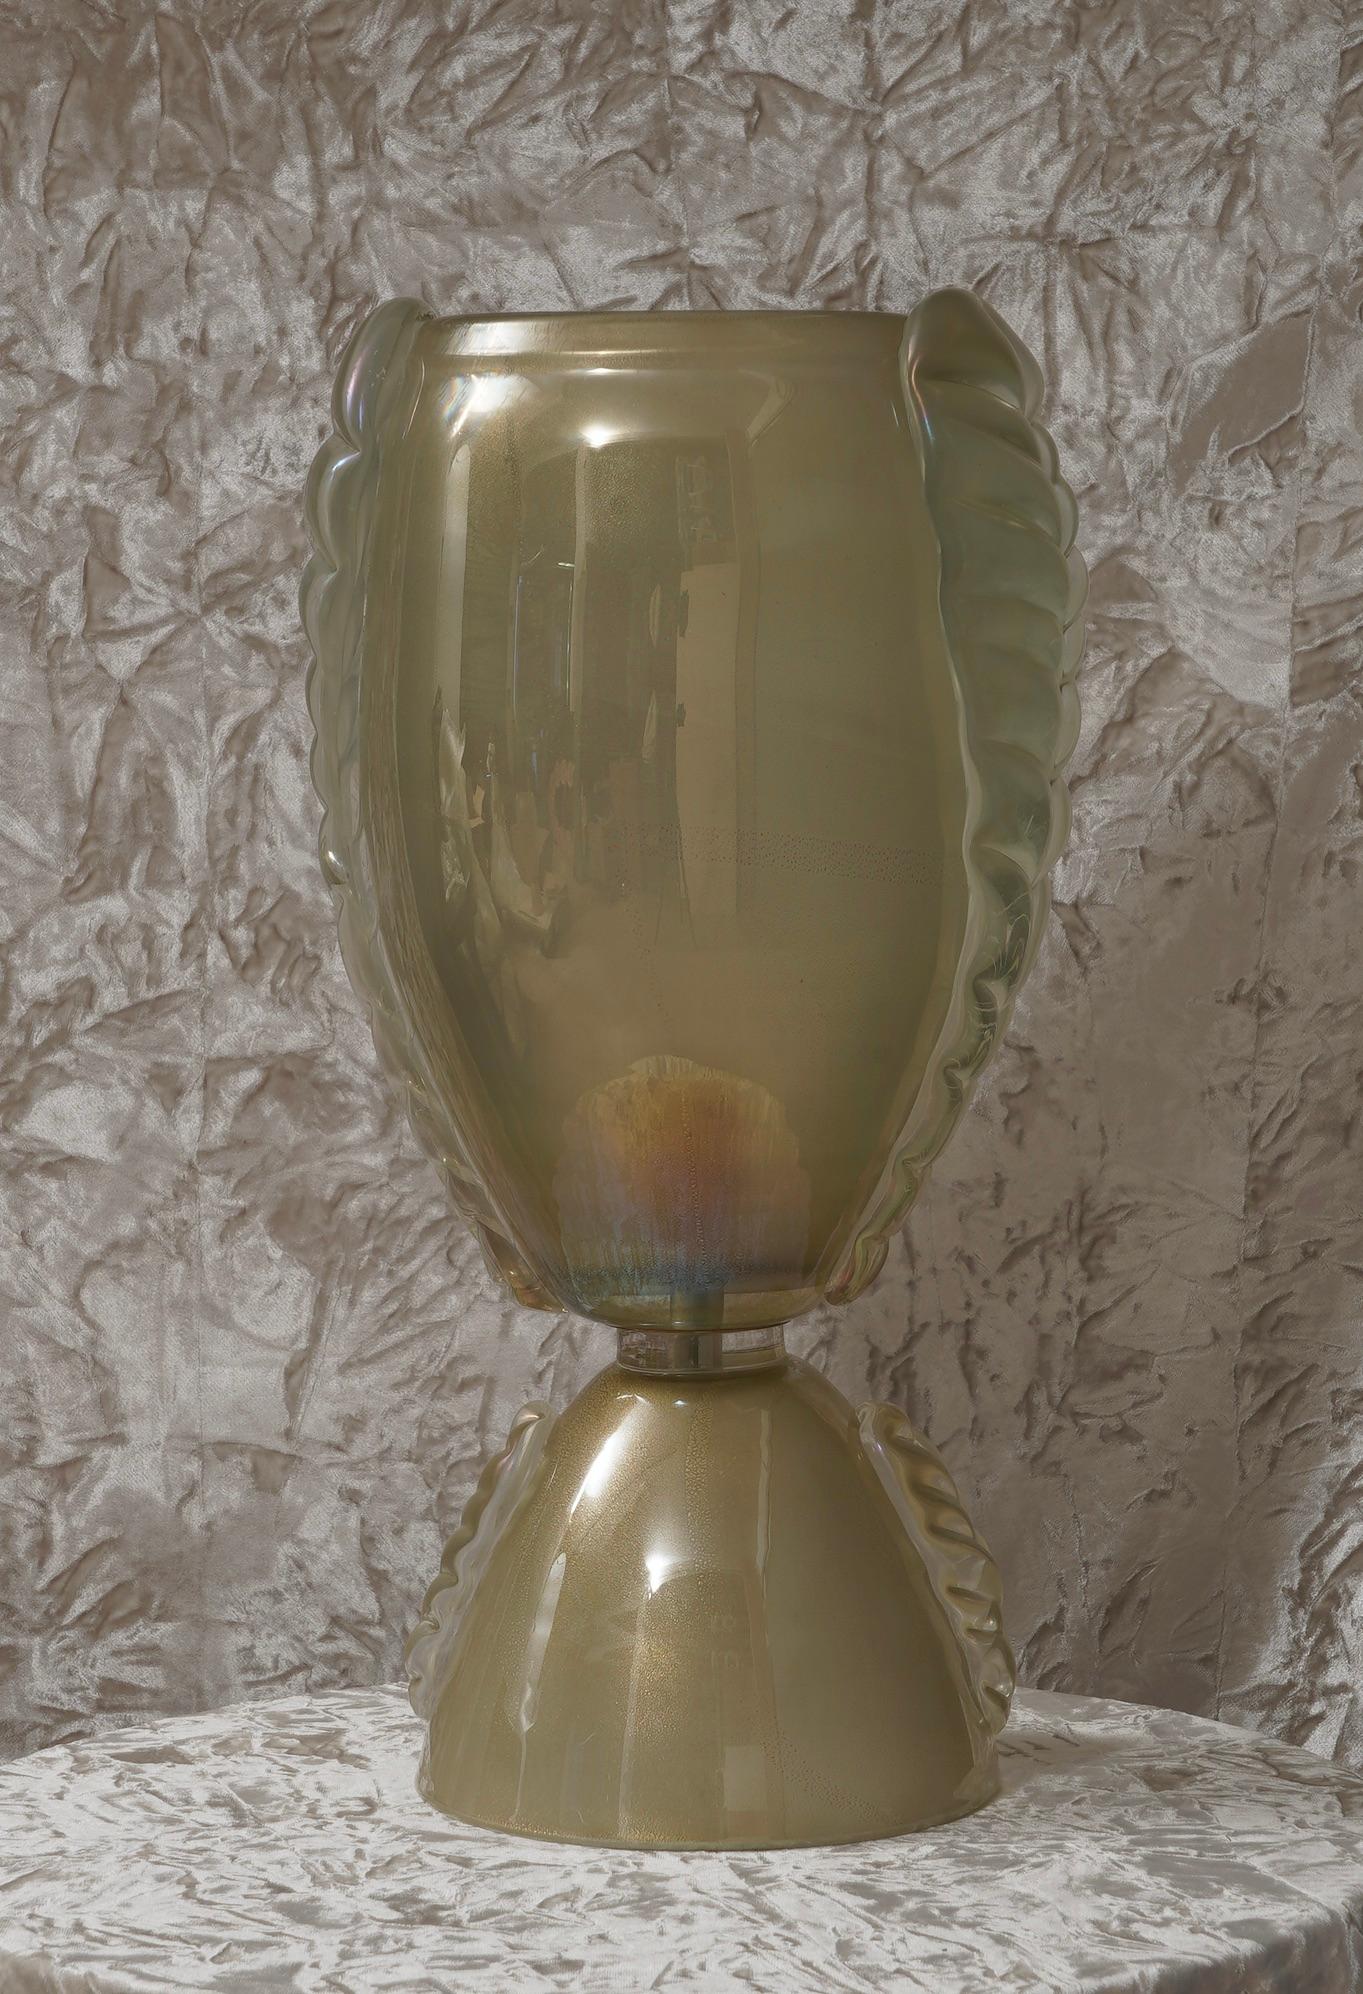 Splendid Murano table lamp in the style of Barovier & Toso. The Murano furnaces create an indisputable timeless design. A supreme iridescent green gold color with gold inside.

The table lamp is composed of a large upper cup of round shape, on which